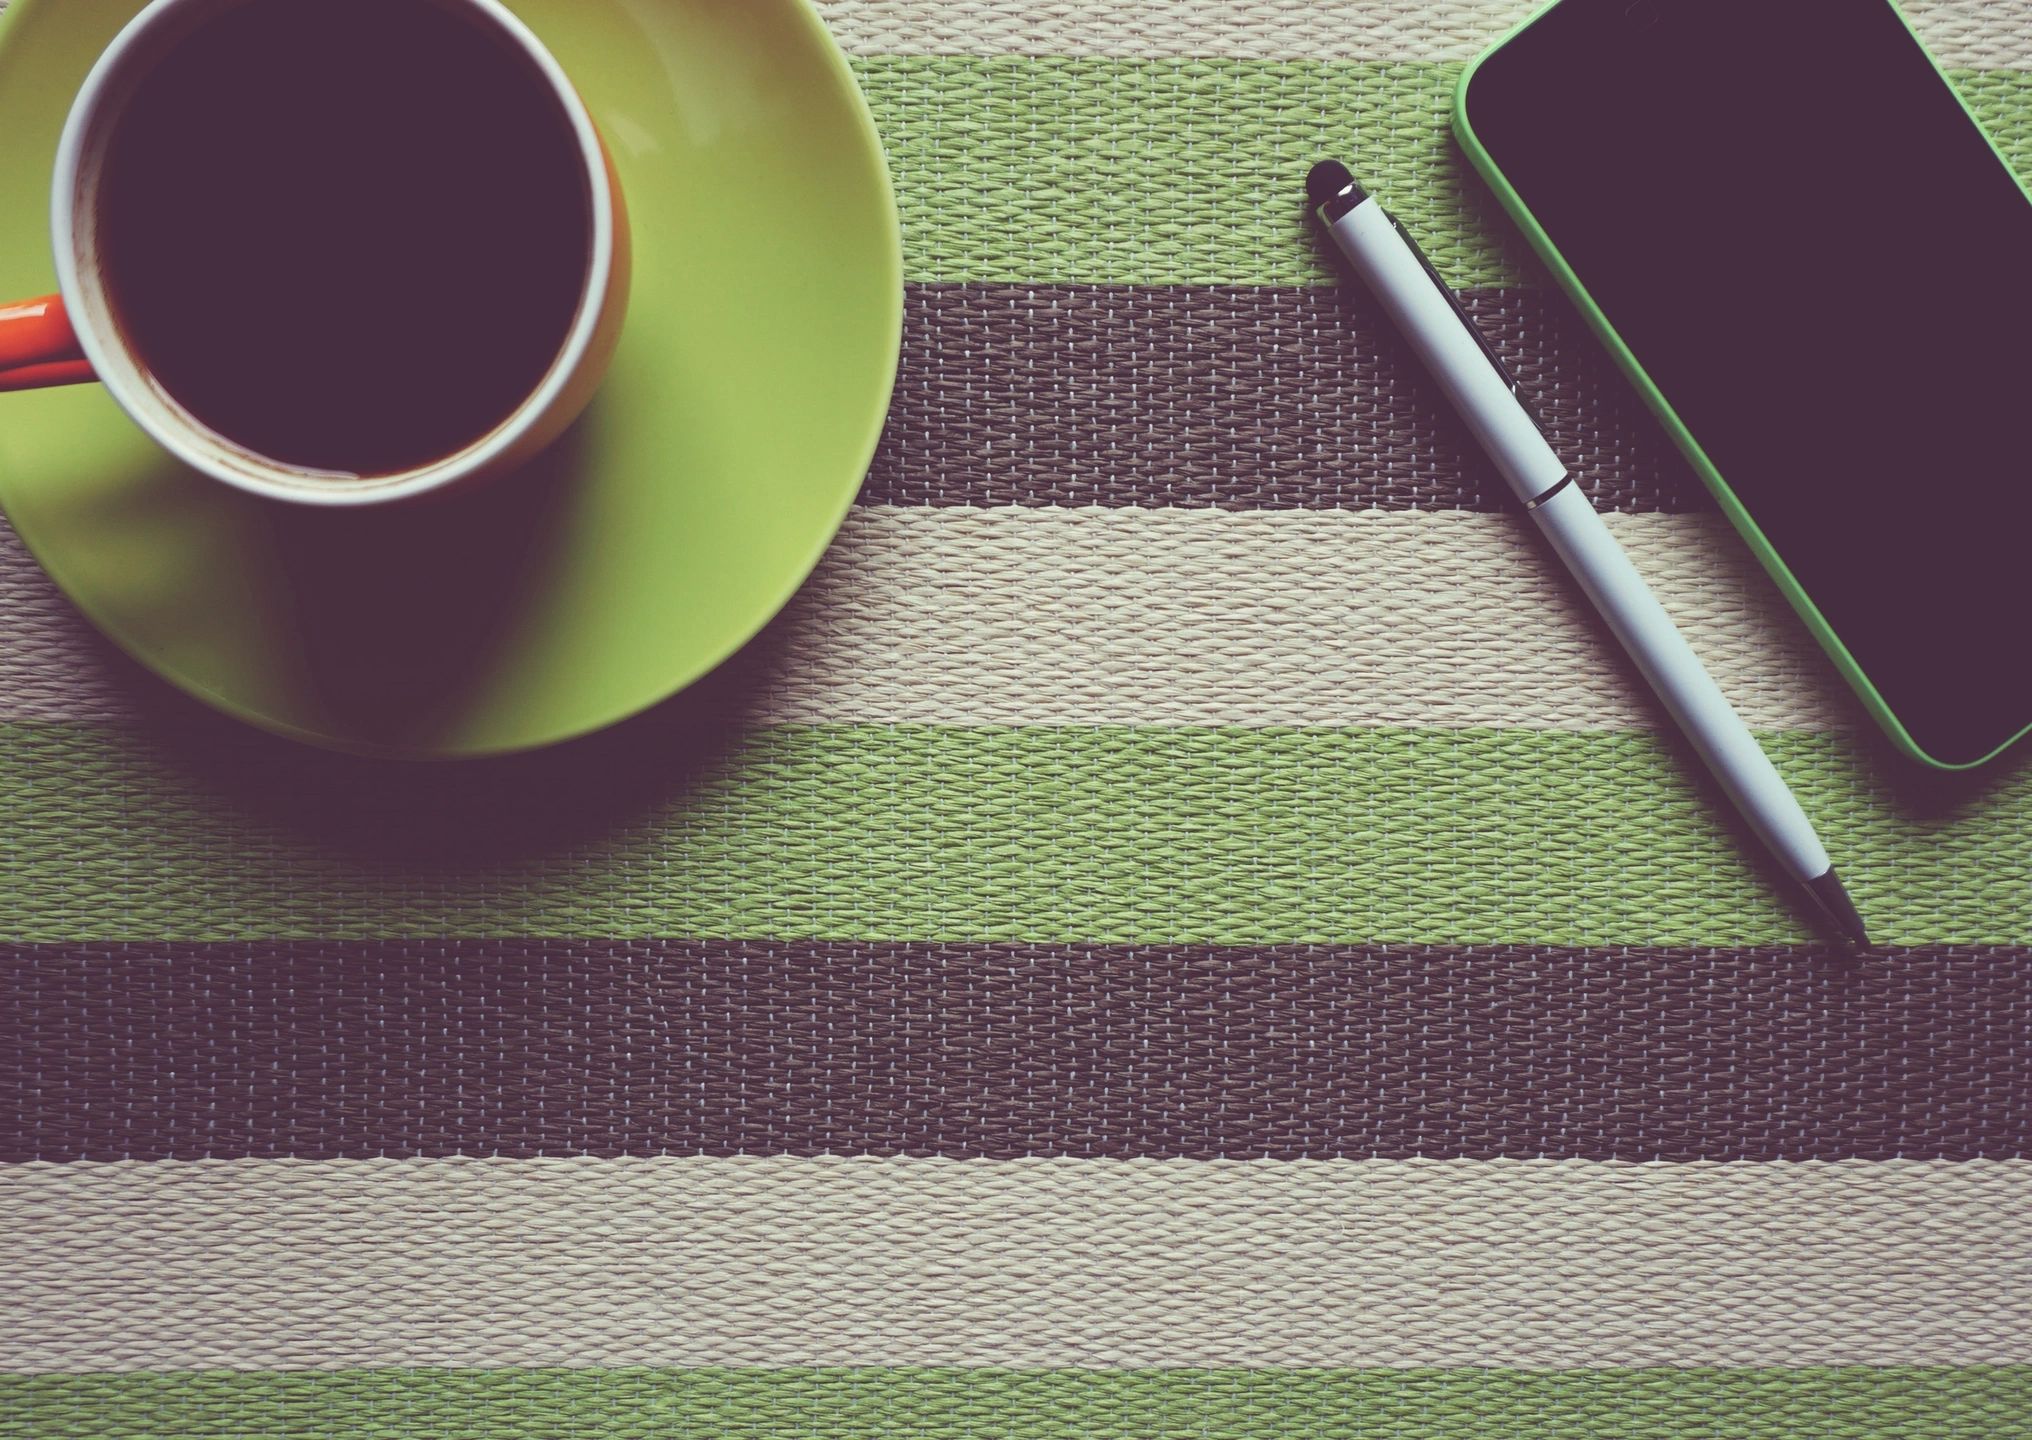 phone coffee pen, striped placemat